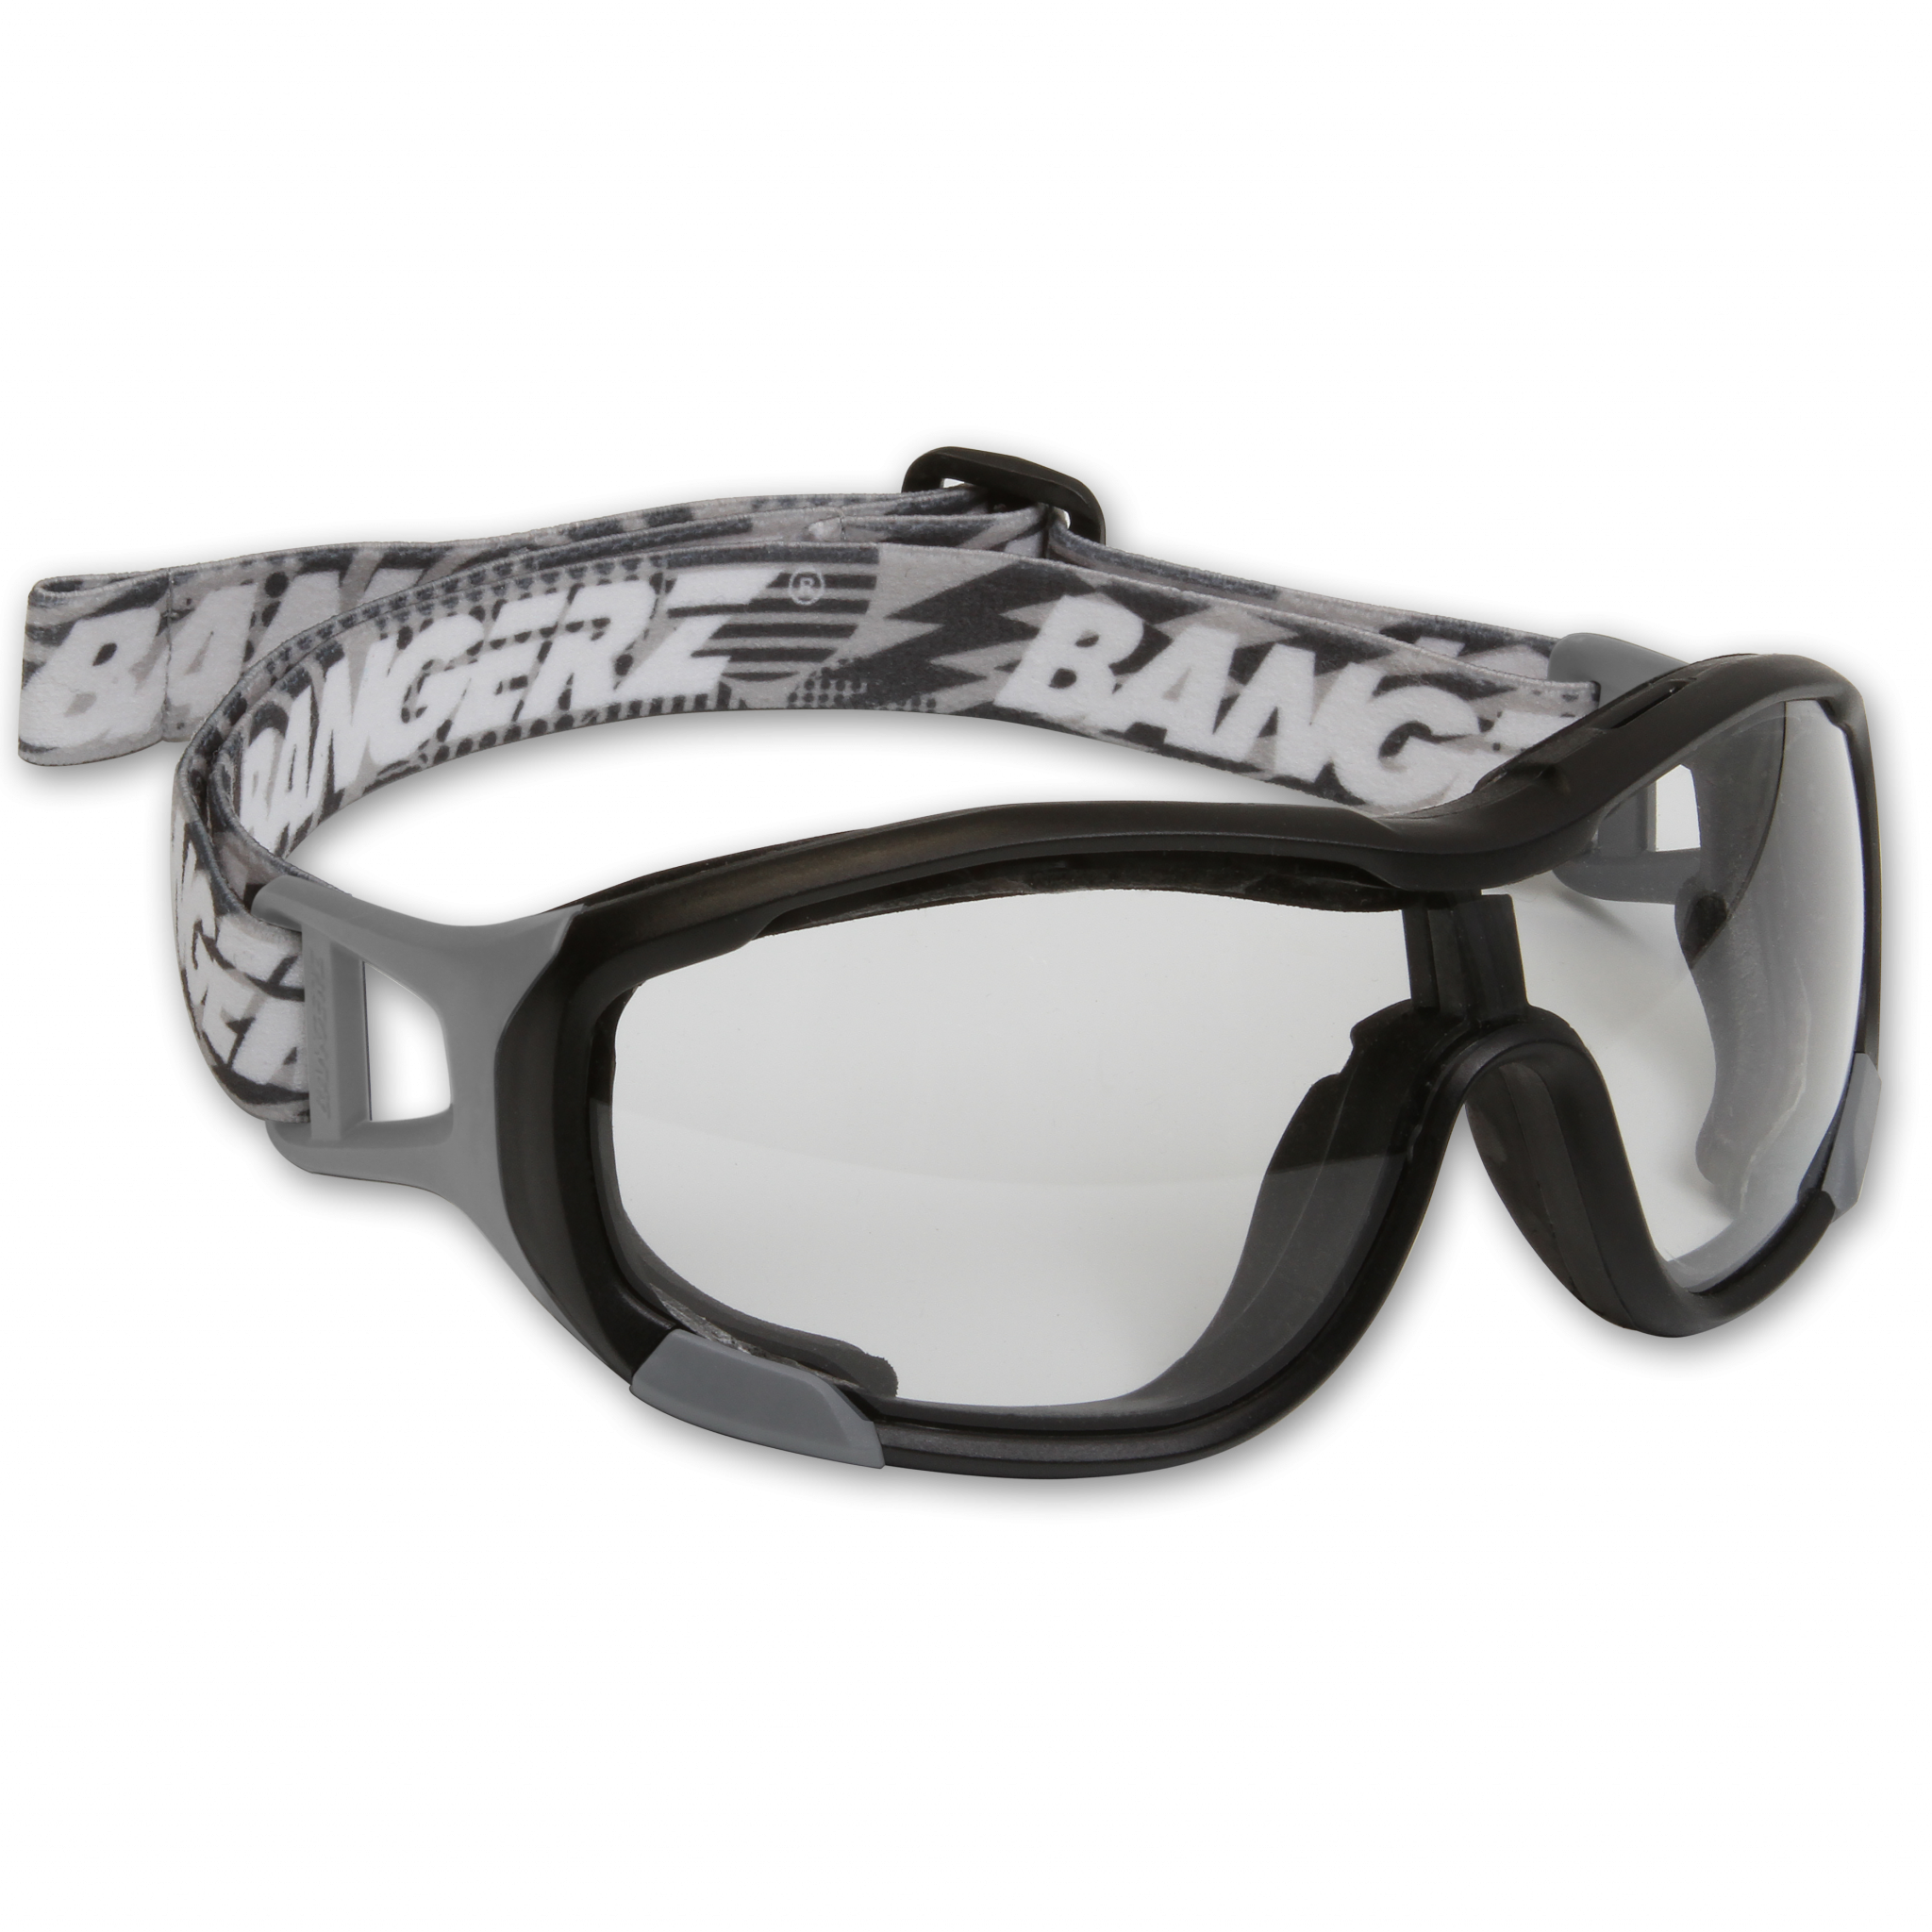 Bangerz Women’s Adult/Youth Field Hockey Lacrosse Goggles HS-3000 Brand New 